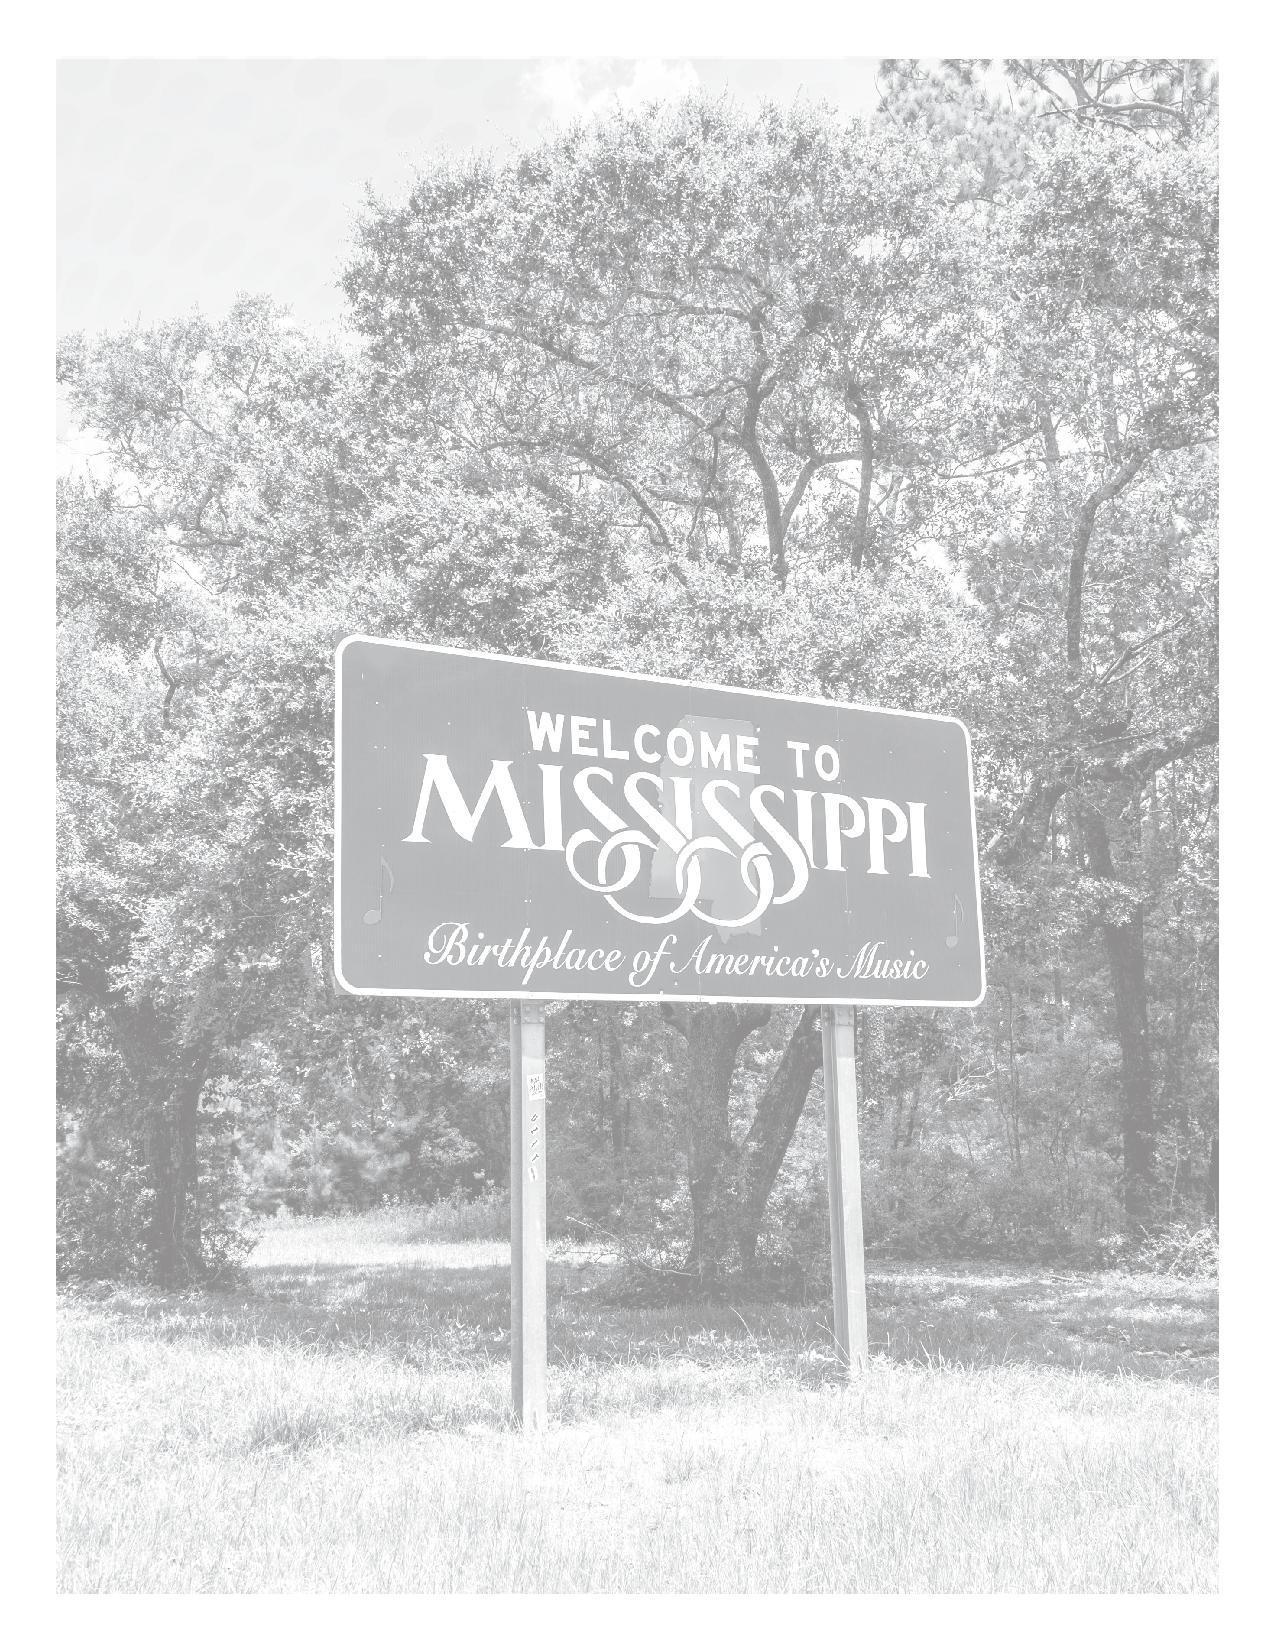 Mississippi Issues briefing book